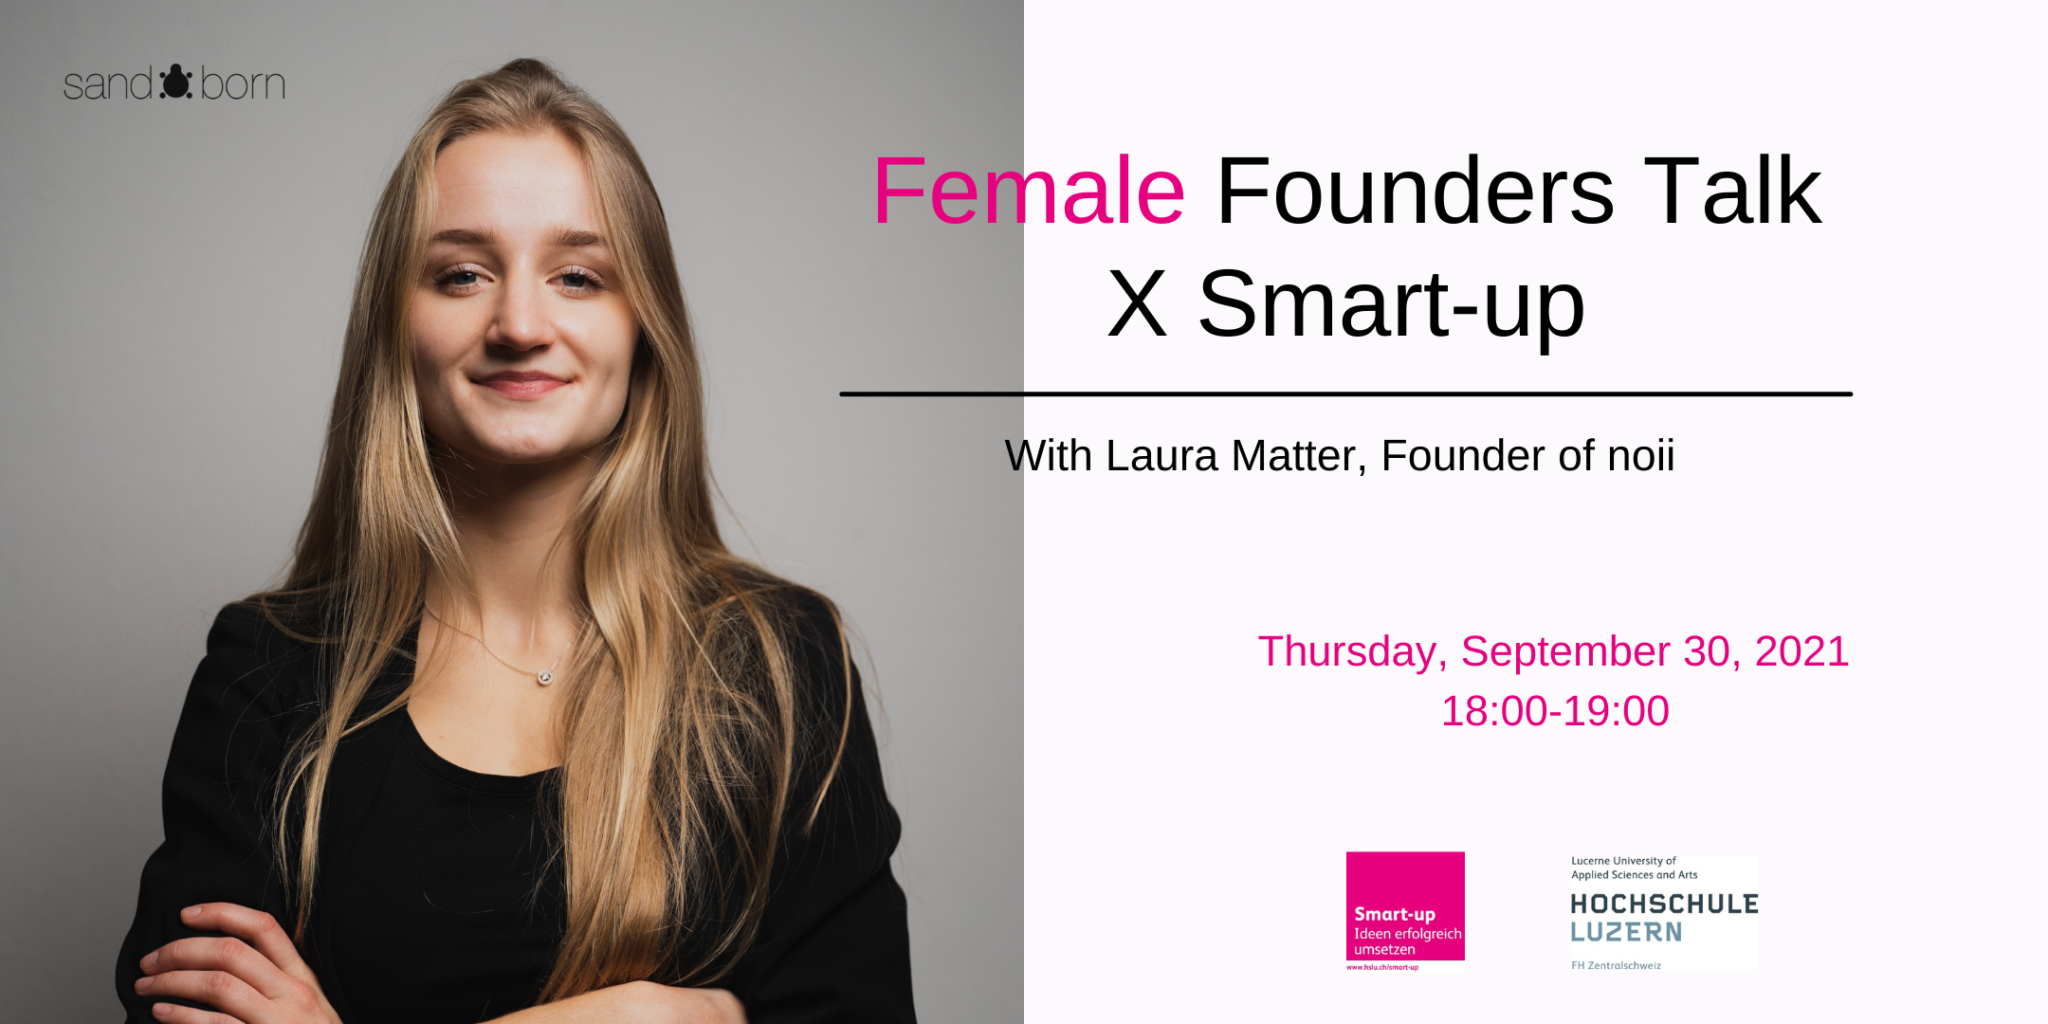 Female Founders Talk X Smart-up with Laura Matter from noii